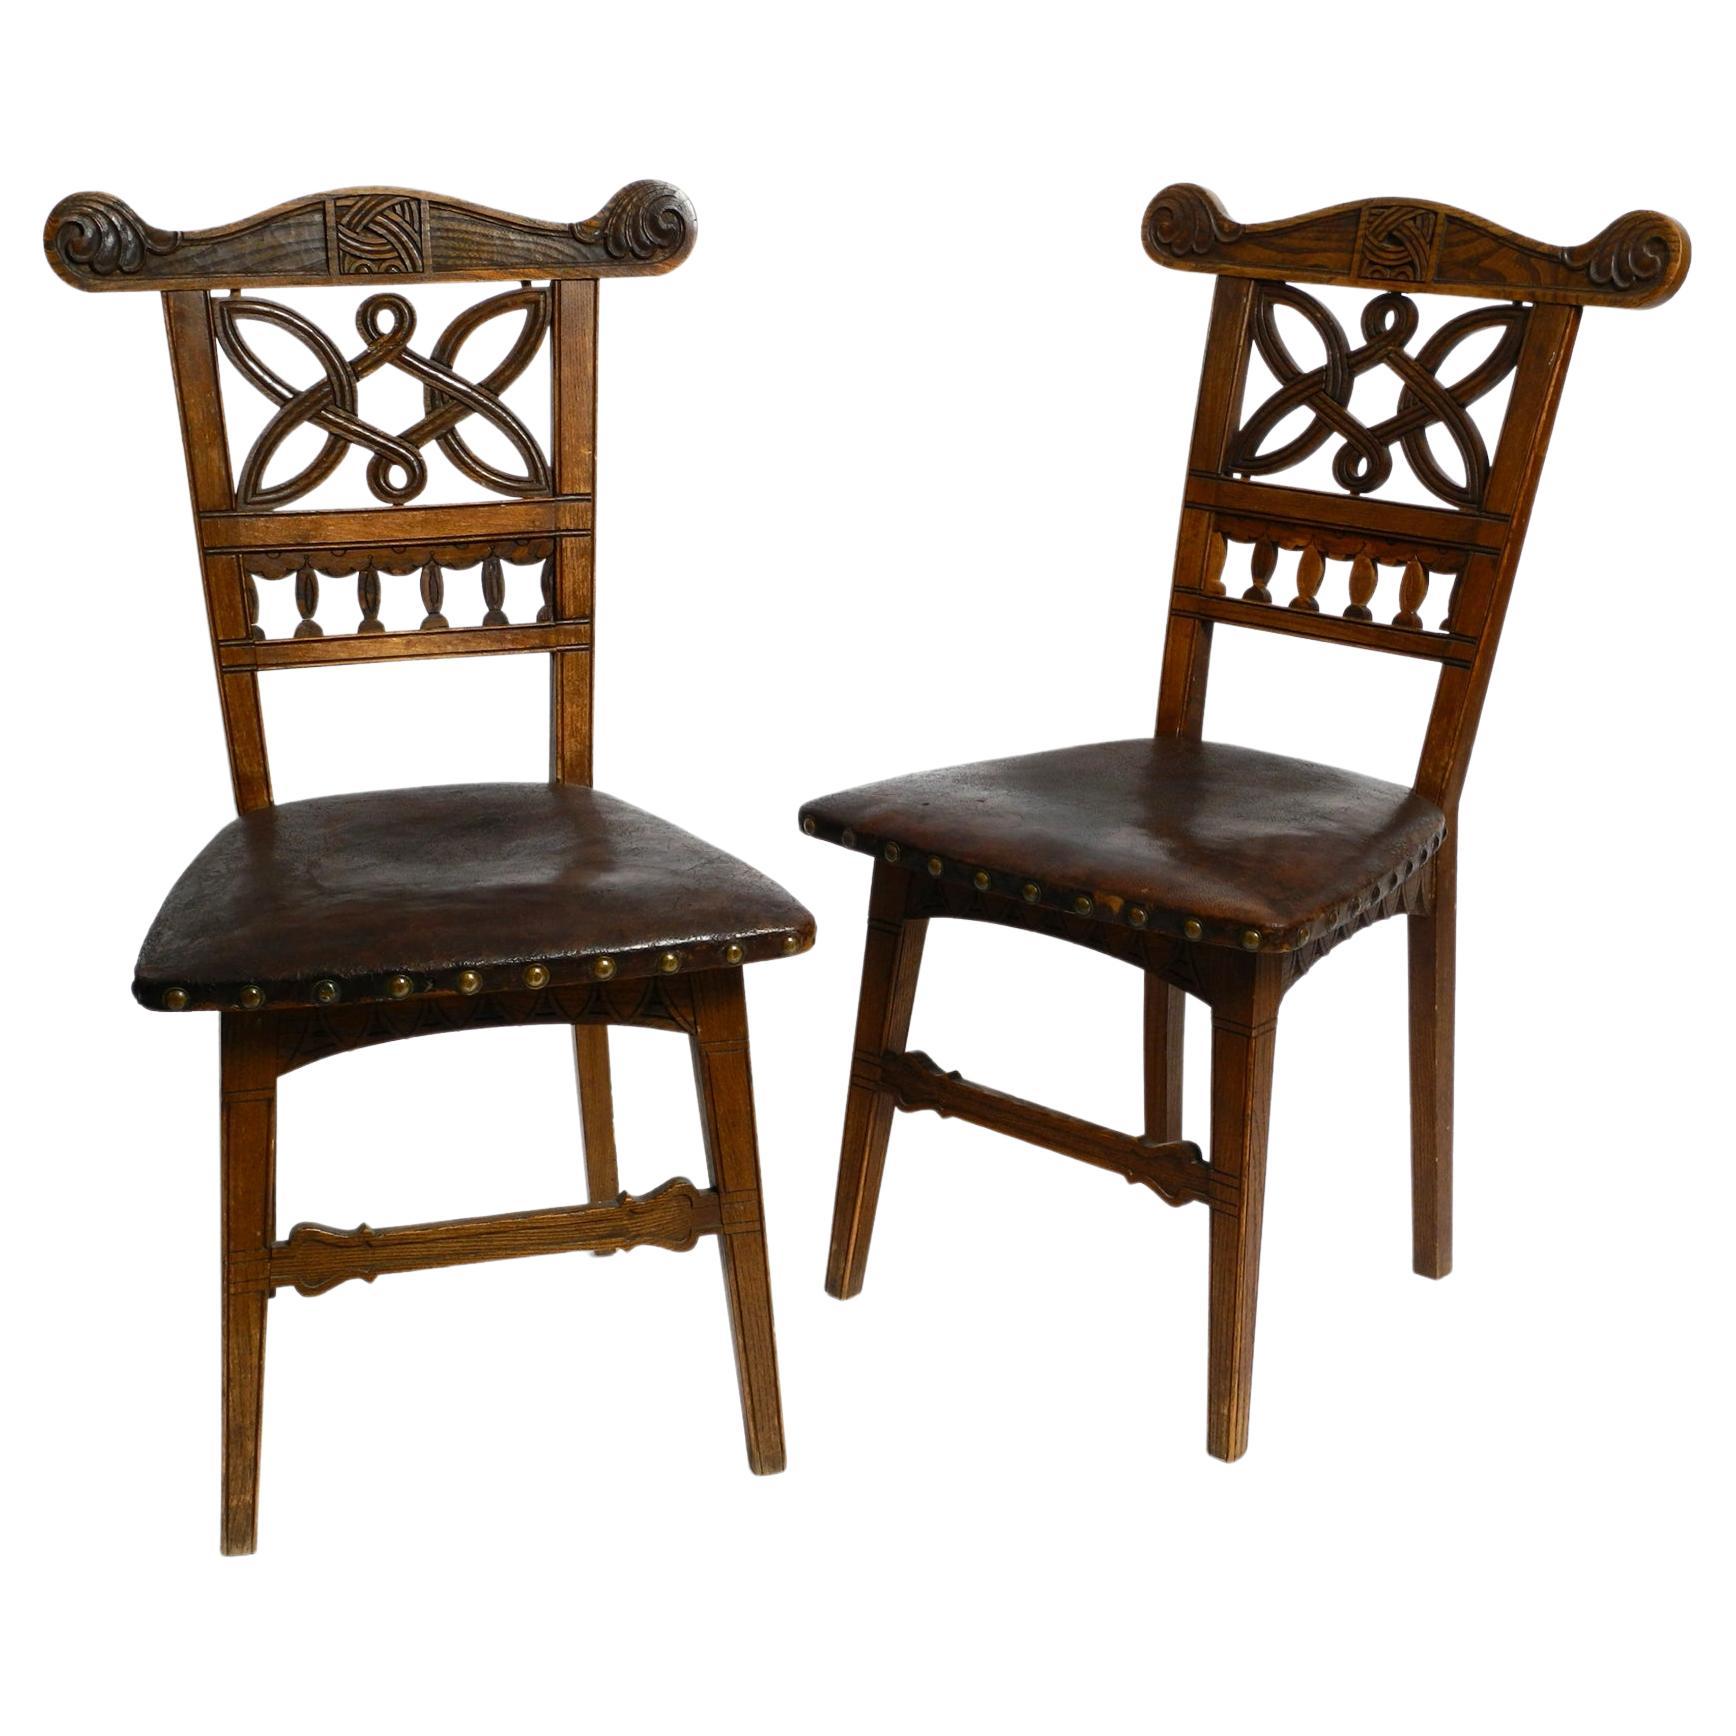 2 Art Nouveau Oak Chairs Still with the Original Leather Seats from Around 1900 For Sale